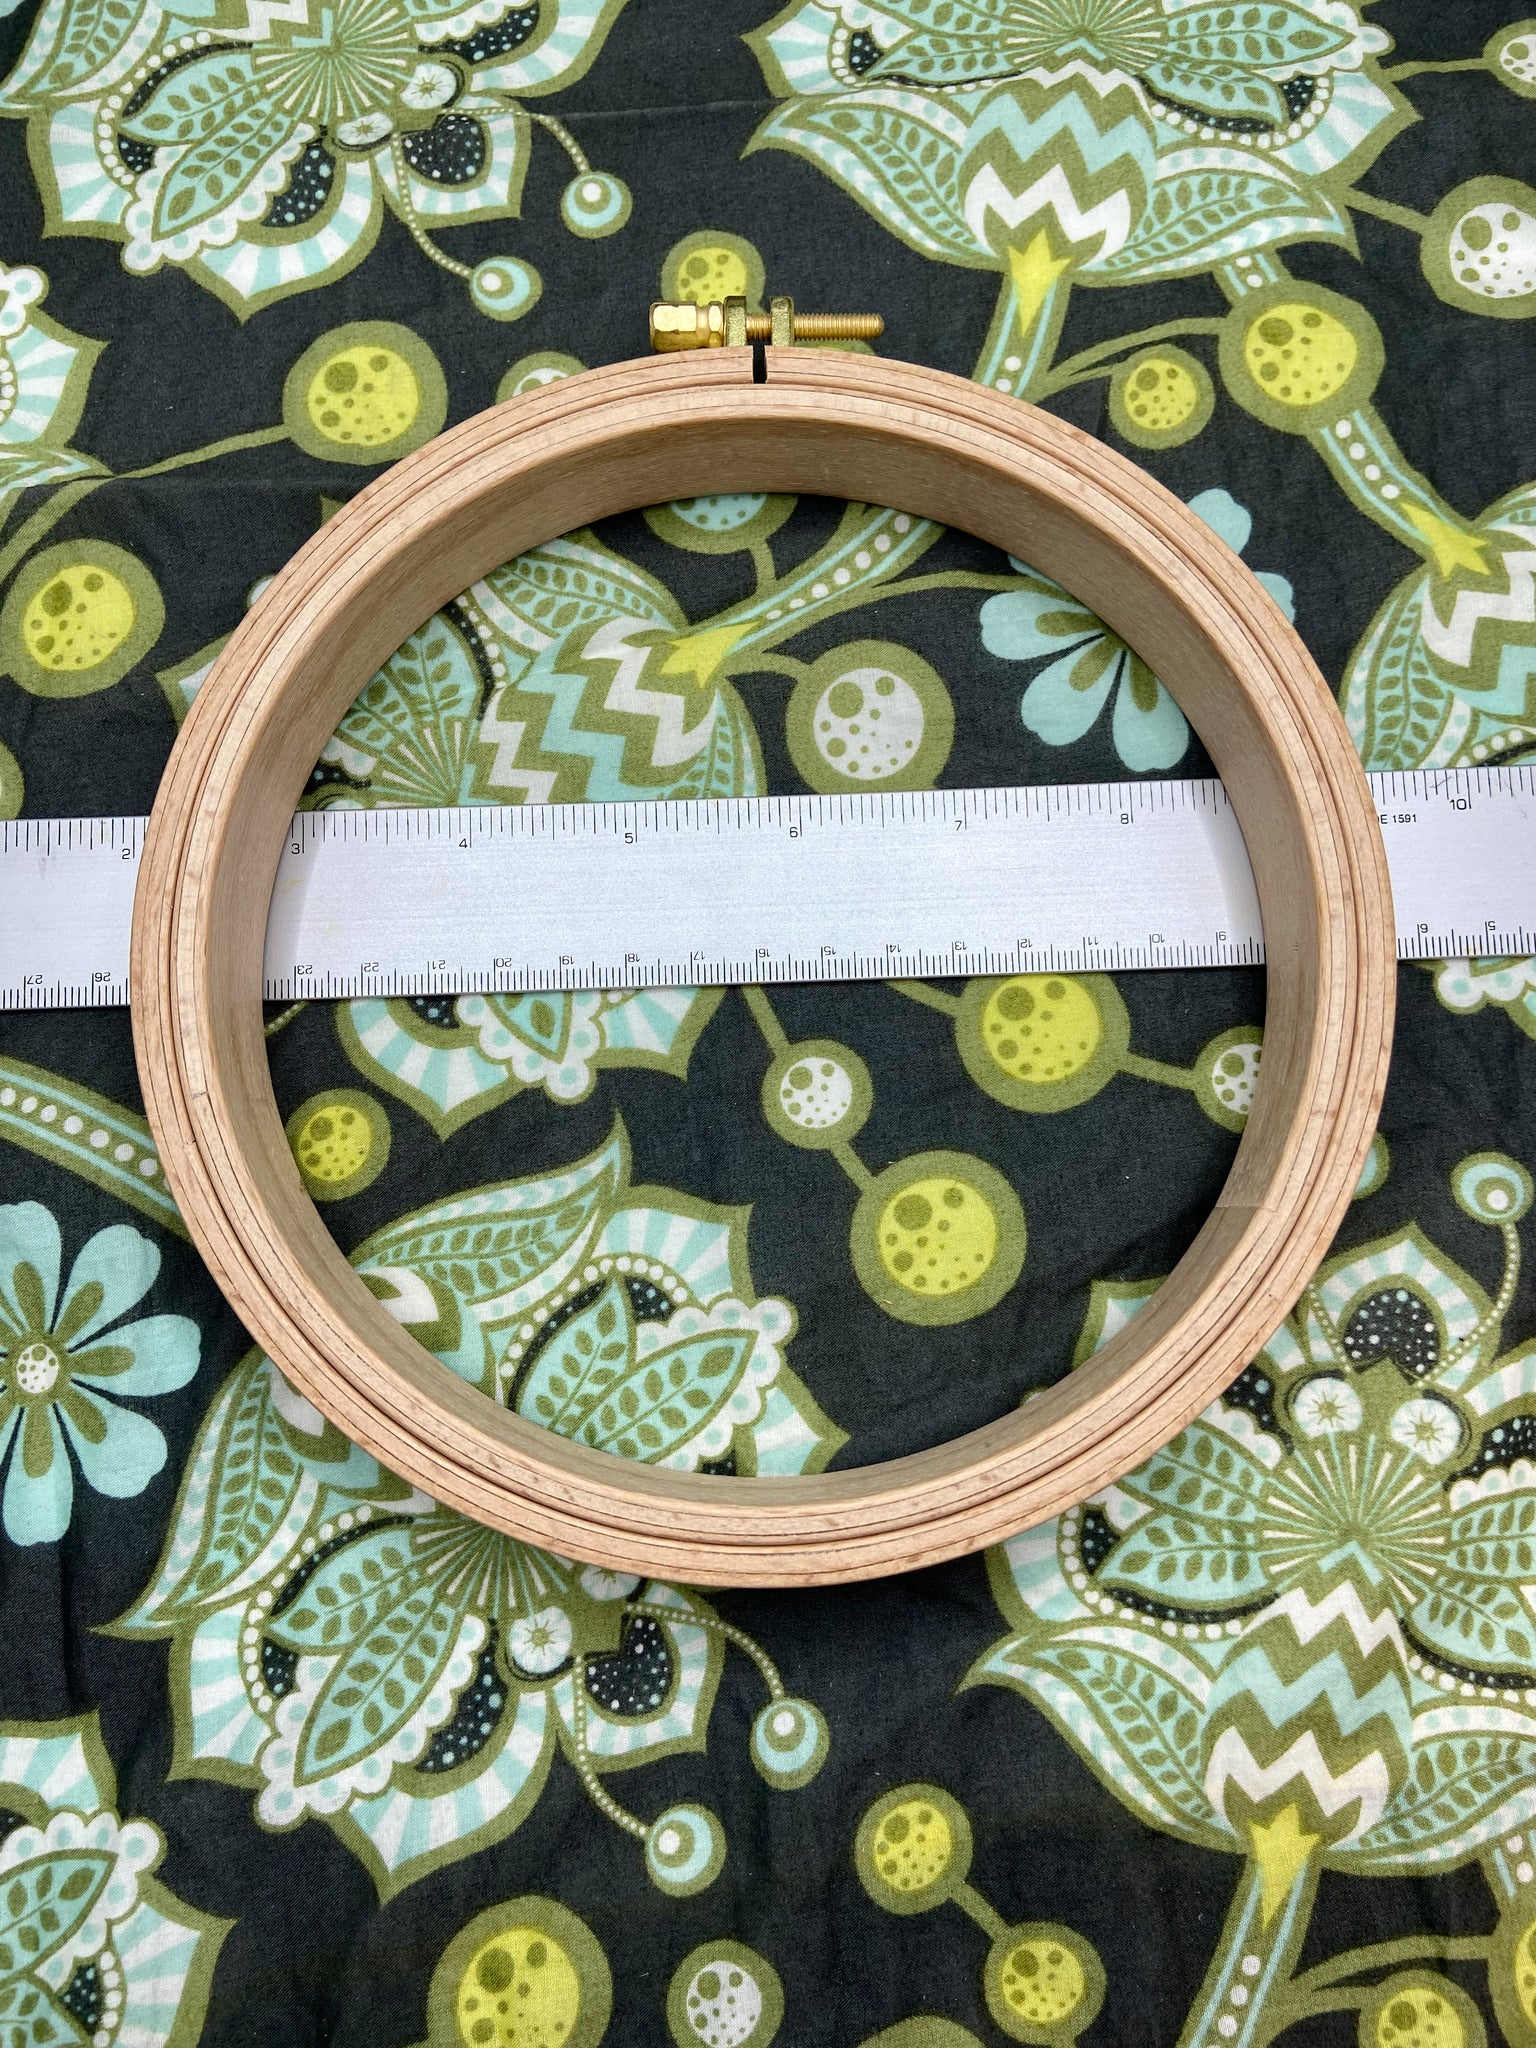 Nurge 24 mm / 1” Beech Screwed Embroidery Hoop – Riverview Stitching